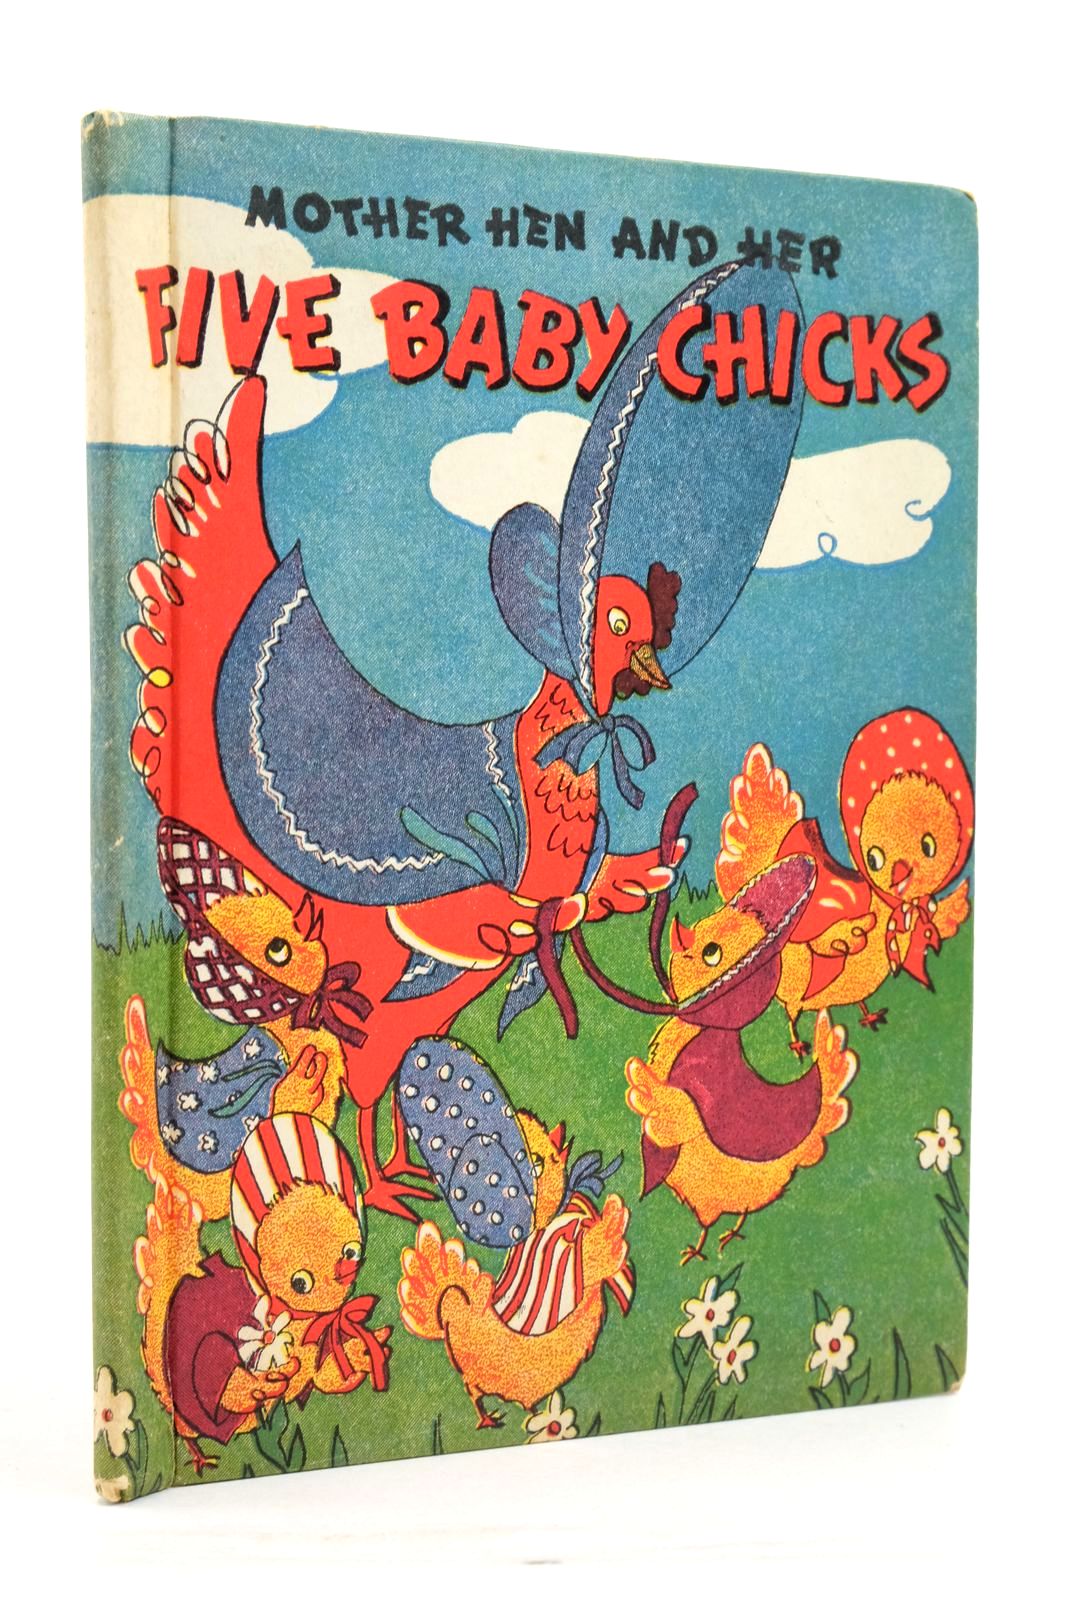 Photo of MOTHER HEN AND HER FIVE BABY CHICKS written by Bradbury, Bianca illustrated by Walker, Ora published by Burke Publishing Company Ltd. (STOCK CODE: 2137453)  for sale by Stella & Rose's Books